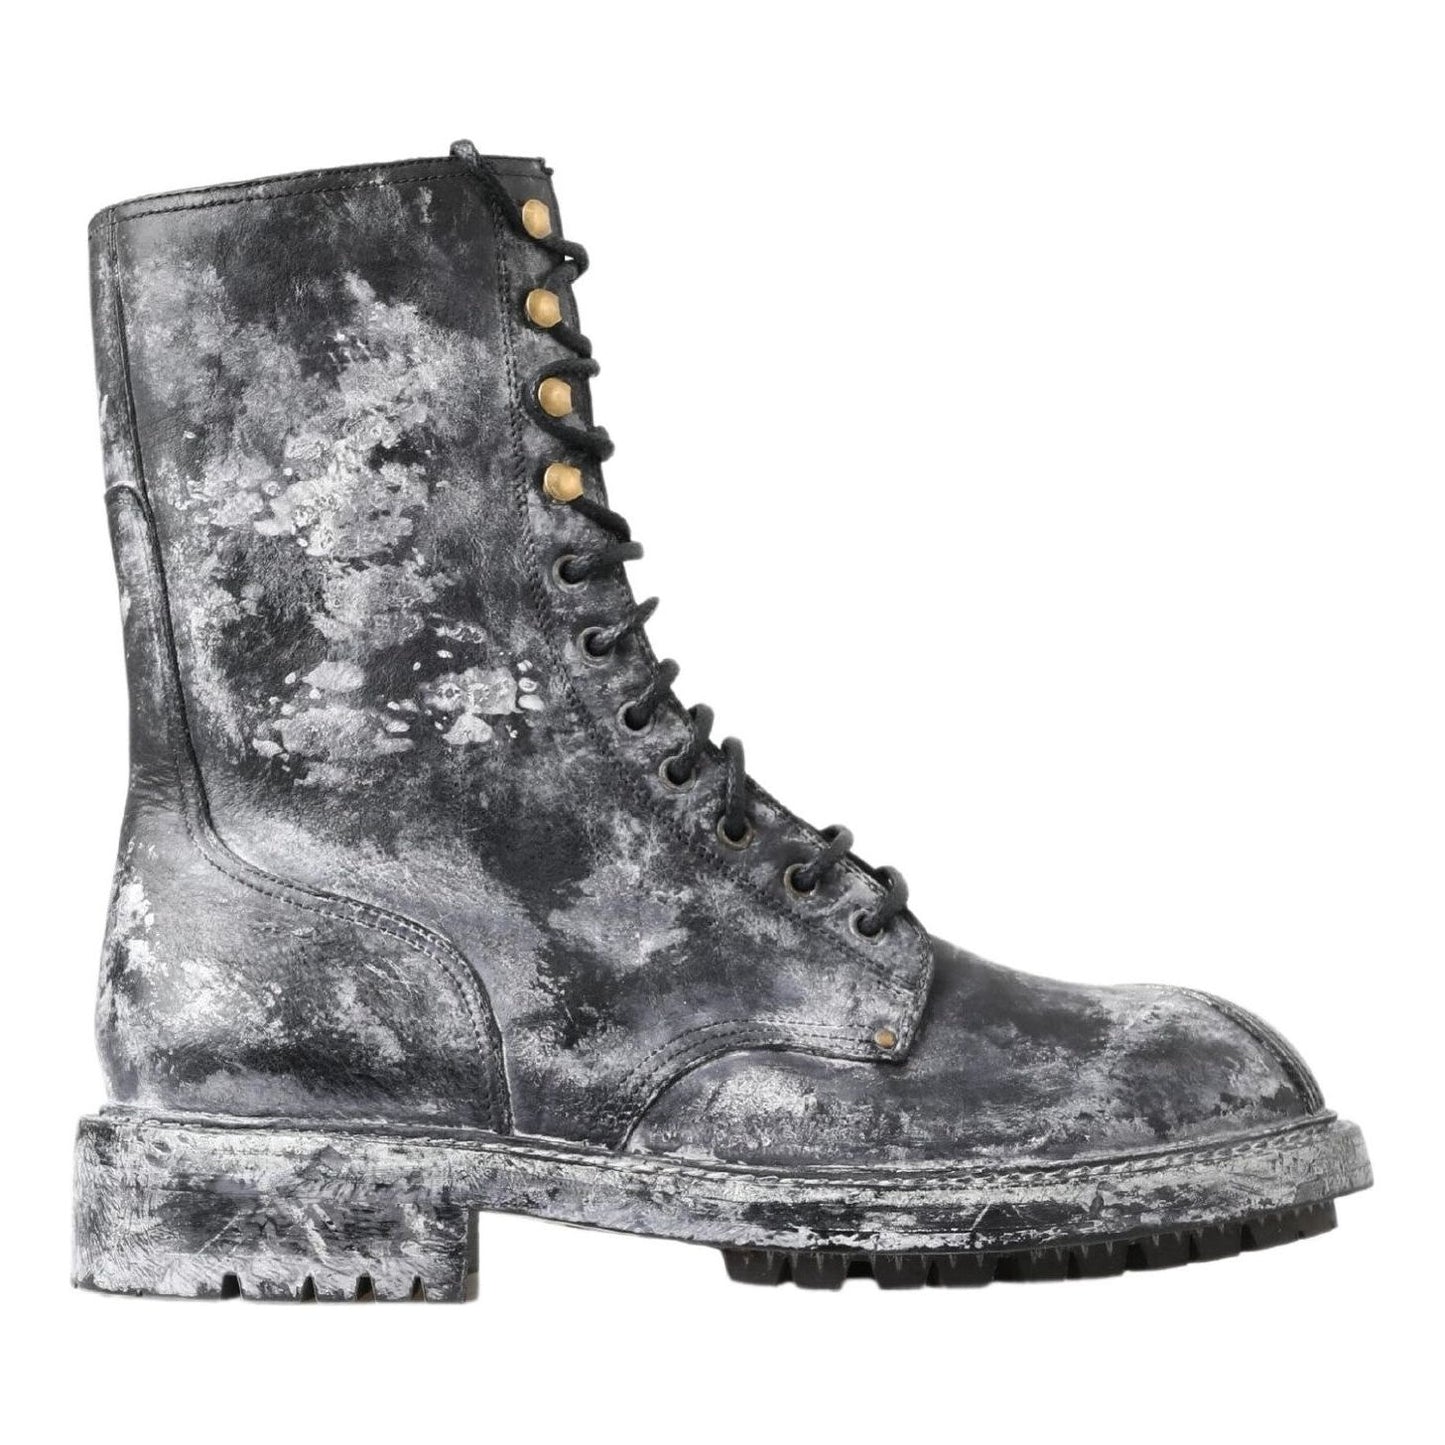 Dolce & Gabbana Chic Black Lace-Up Boots with Gray White Fade black-gray-leather-mid-calf-boots-shoes